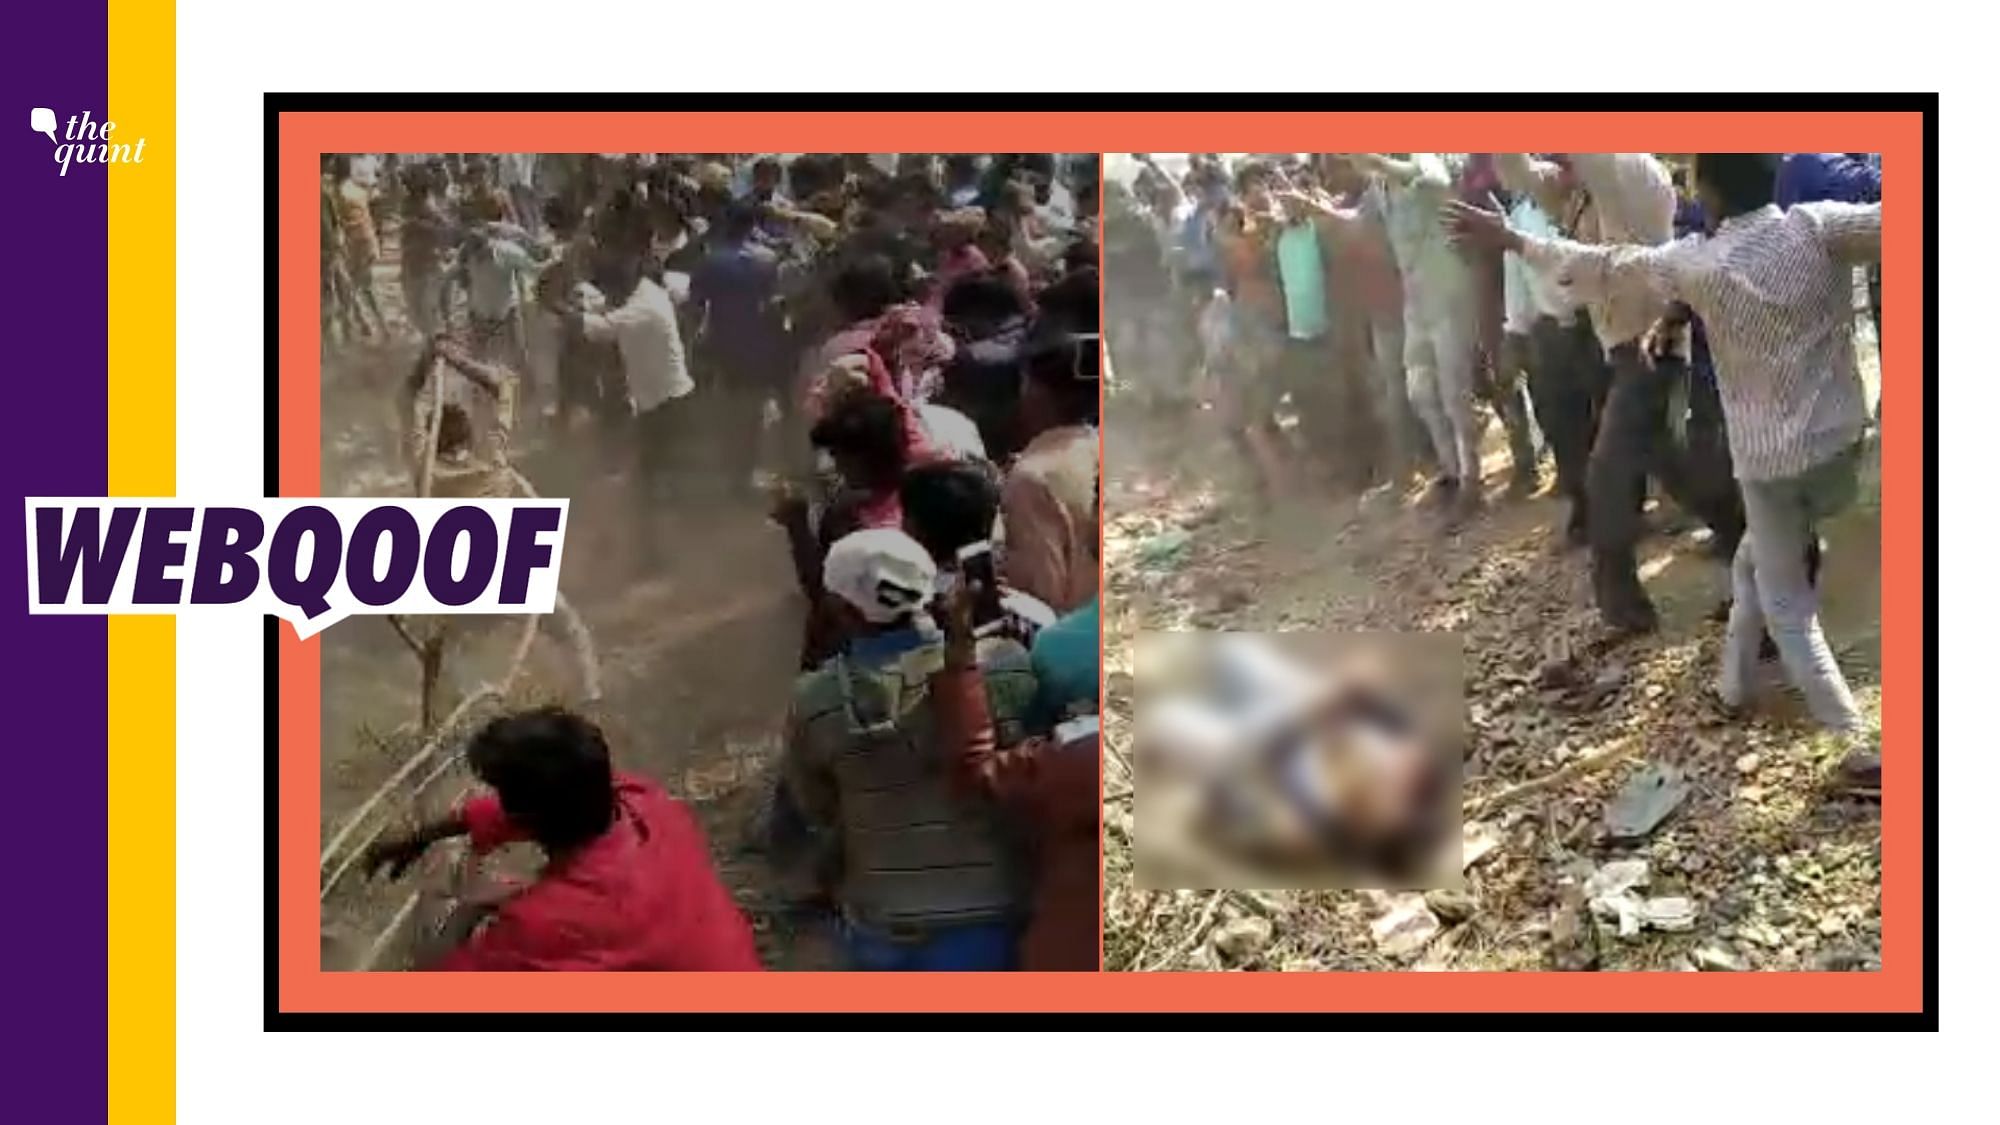 An old video from Madhya Pradesh is being falsely circulated to claim that it is from the clashes that took place in Delhi.